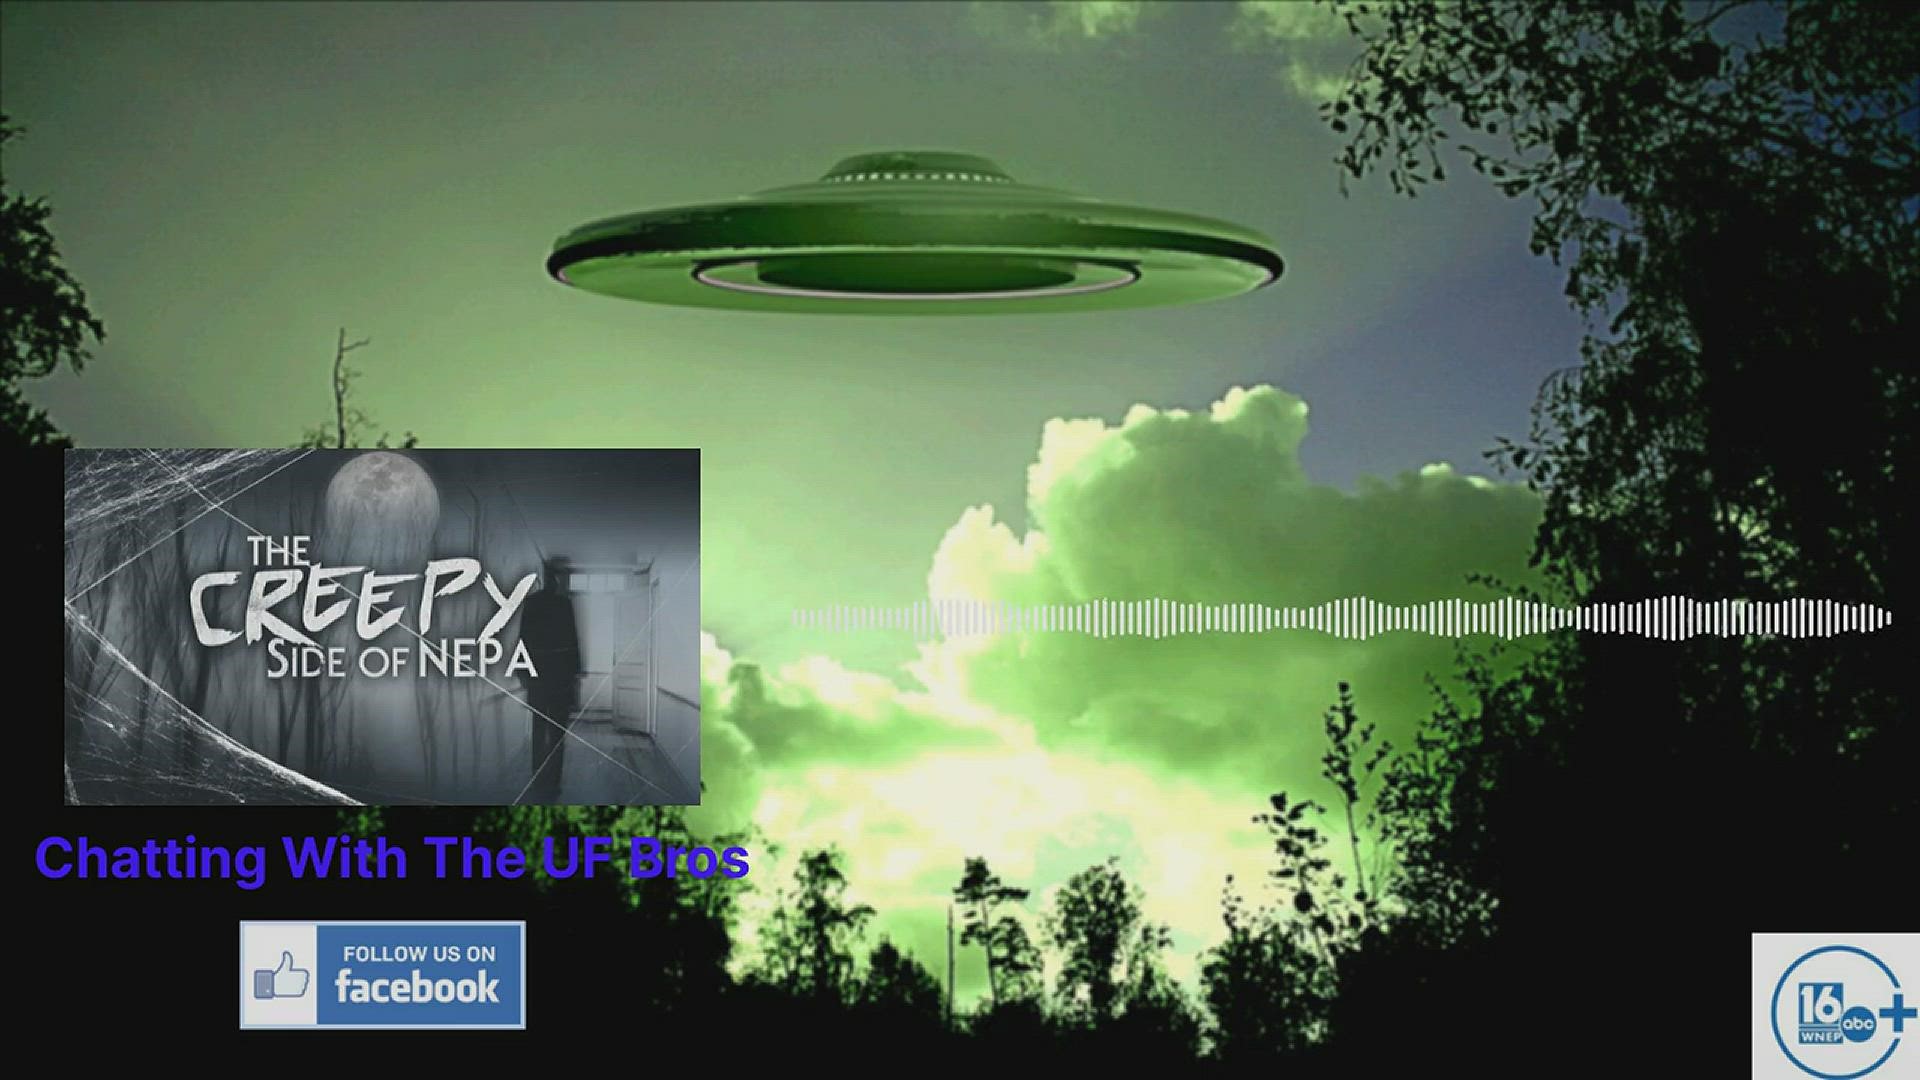 In this episode, we discuss area UFO sightings, some unexplained events, and much more.